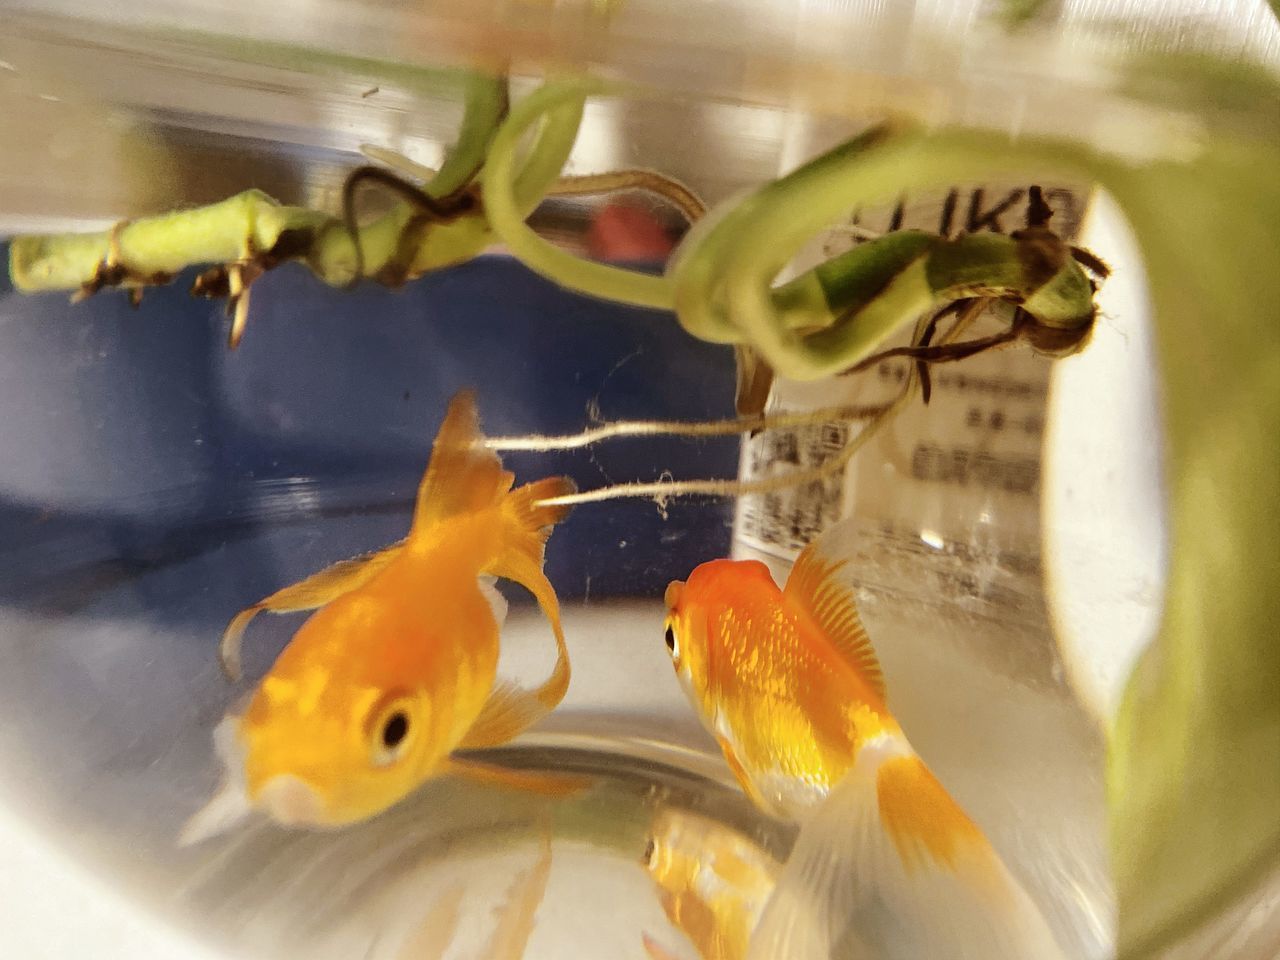 CLOSE-UP OF FISH SWIMMING IN GLASS